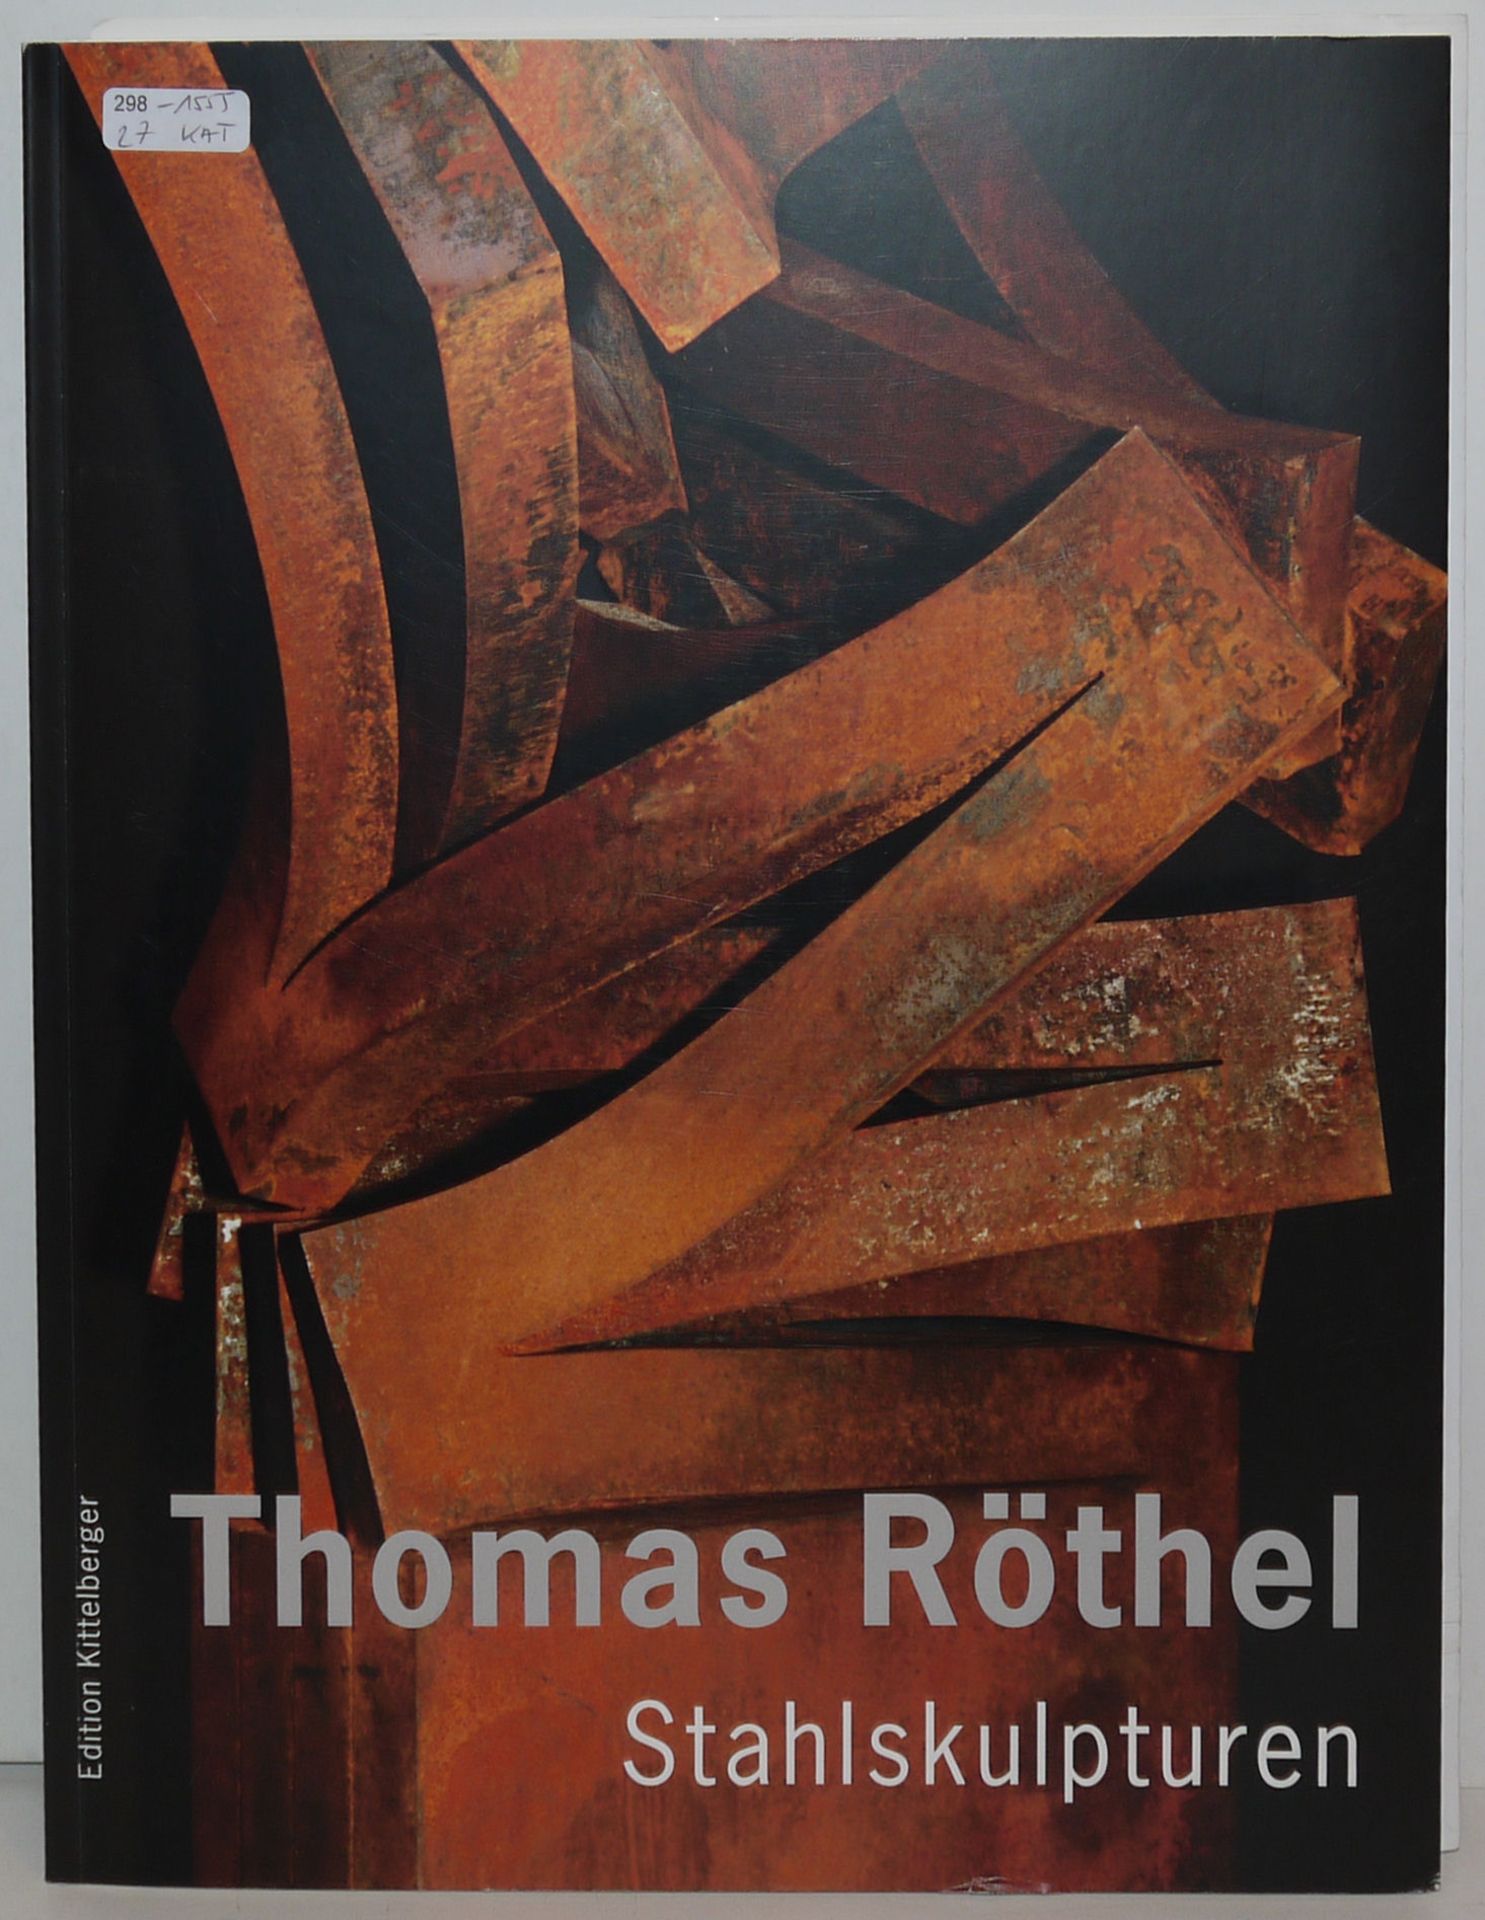 Thomas Röthel, room sculpture, steel with rust patina, with monograph "Thomas Röthel Stahlskulpture - Image 3 of 3